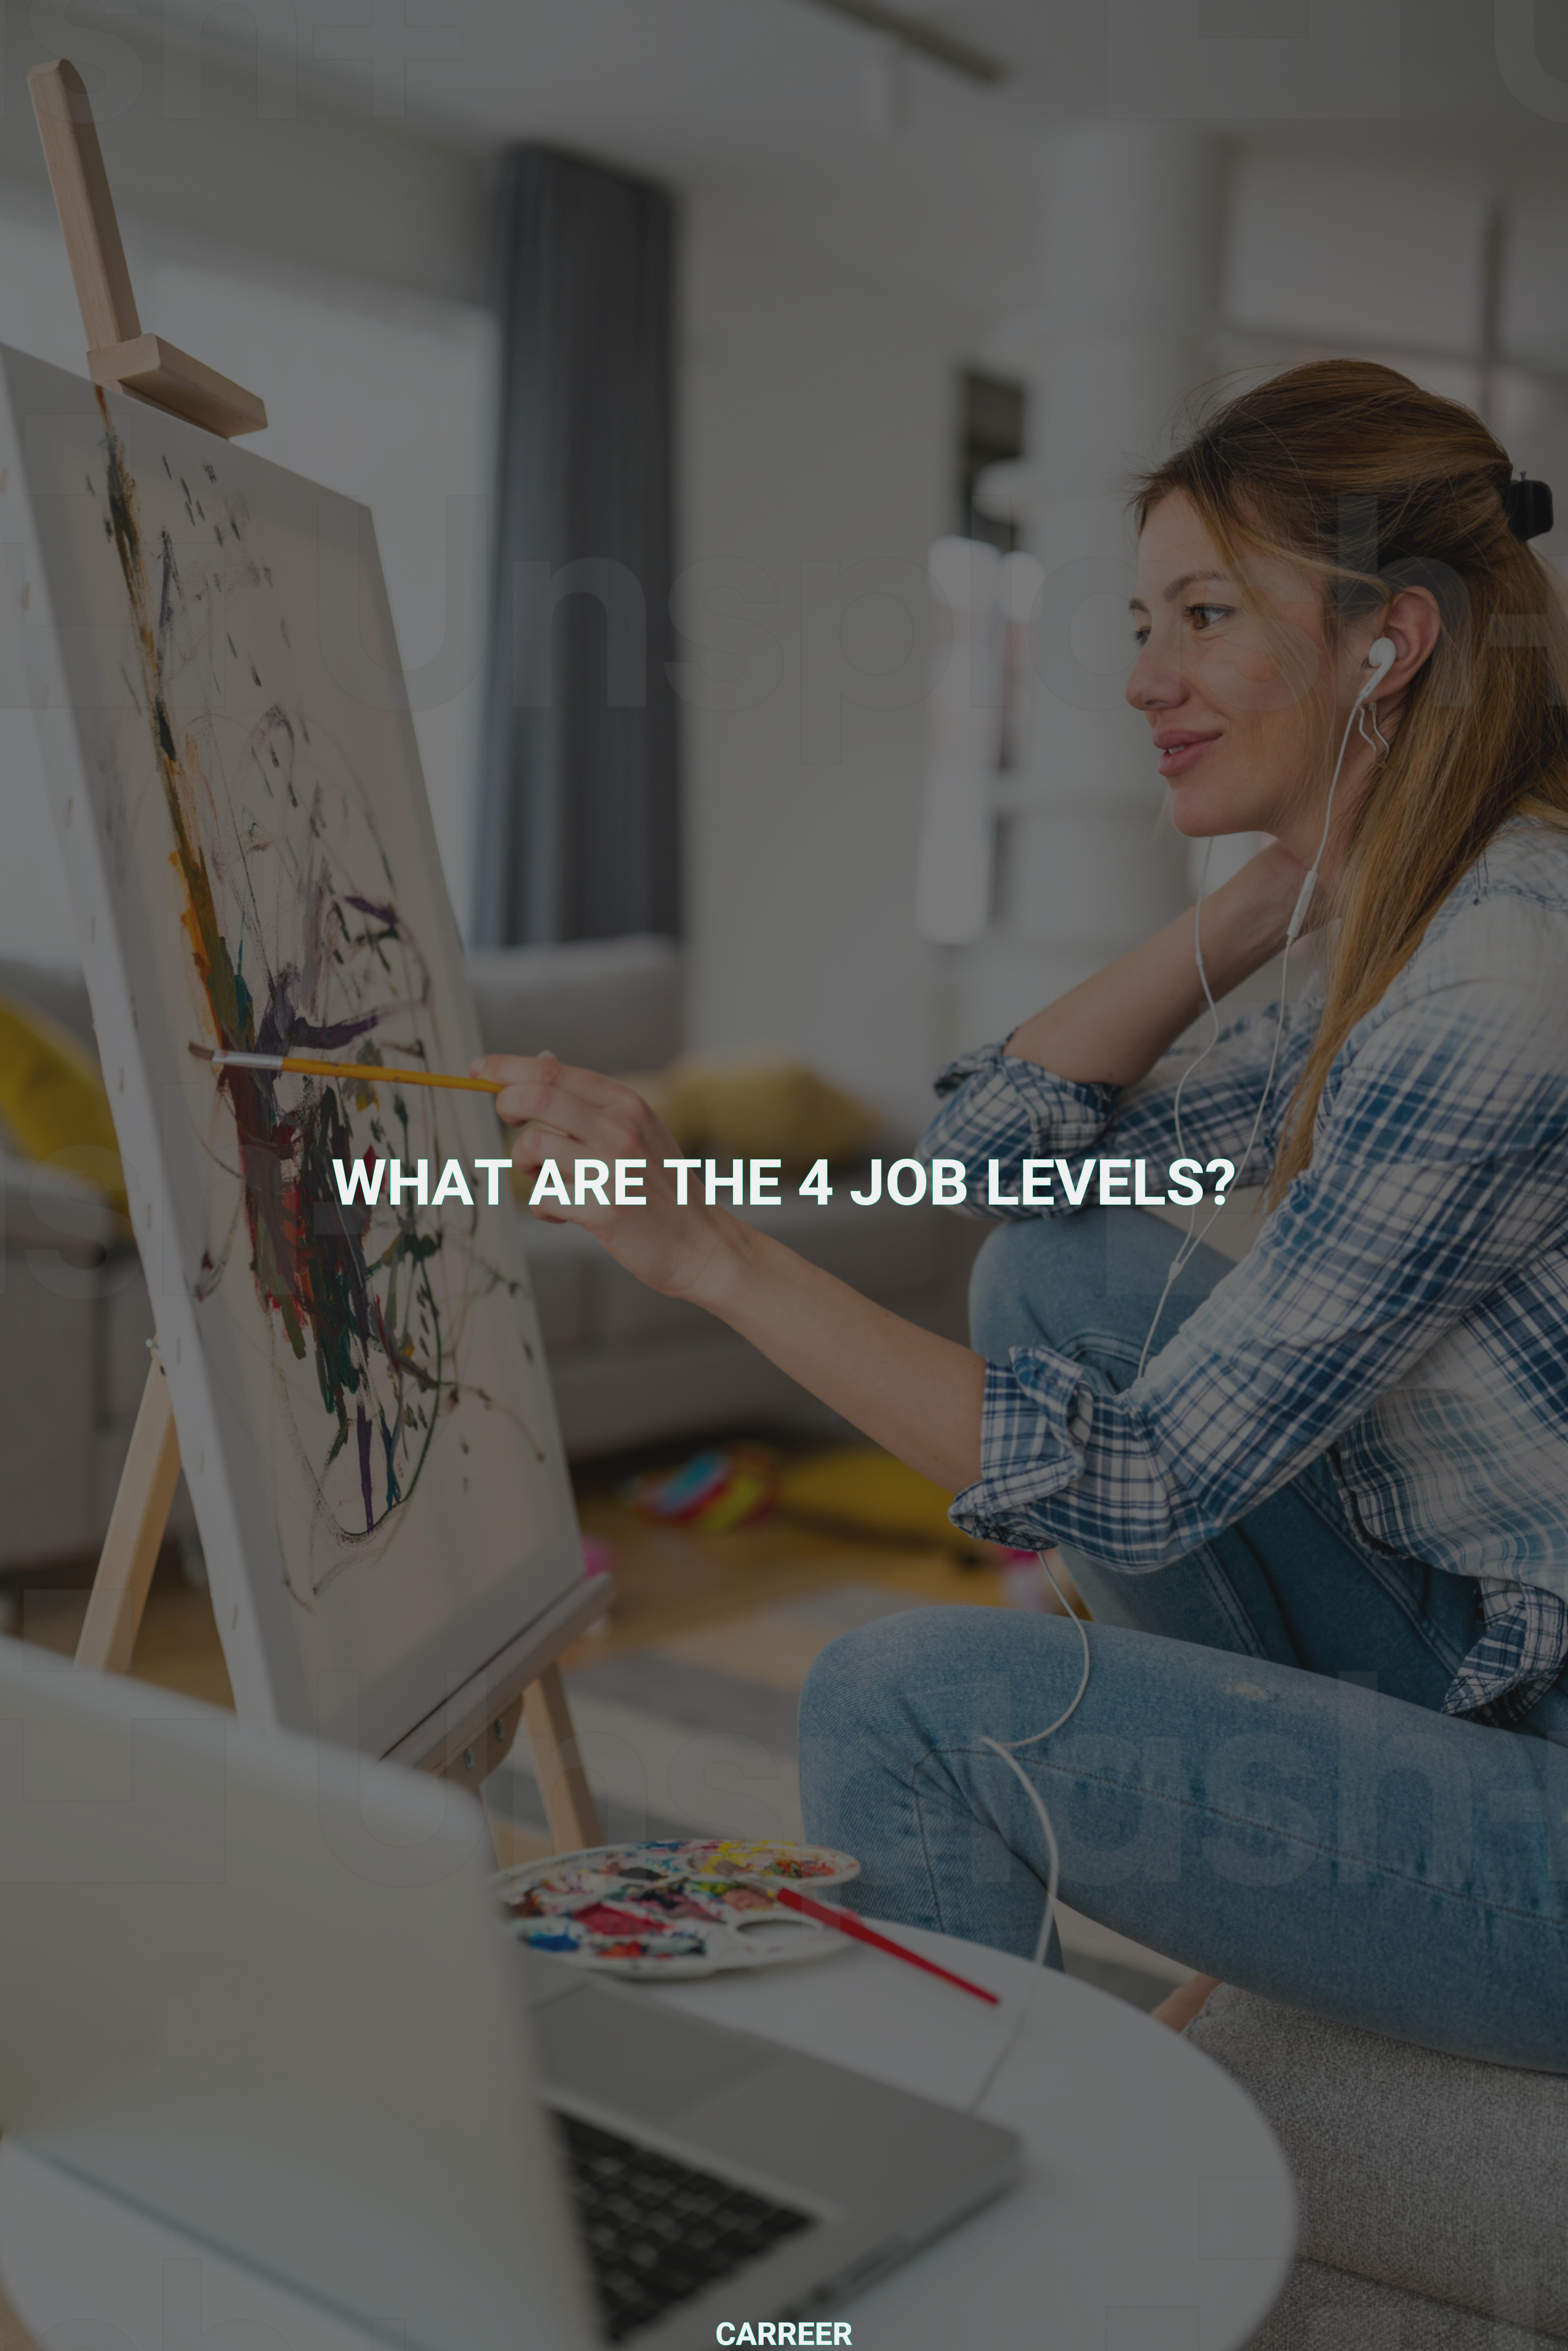 What are the 4 job levels?